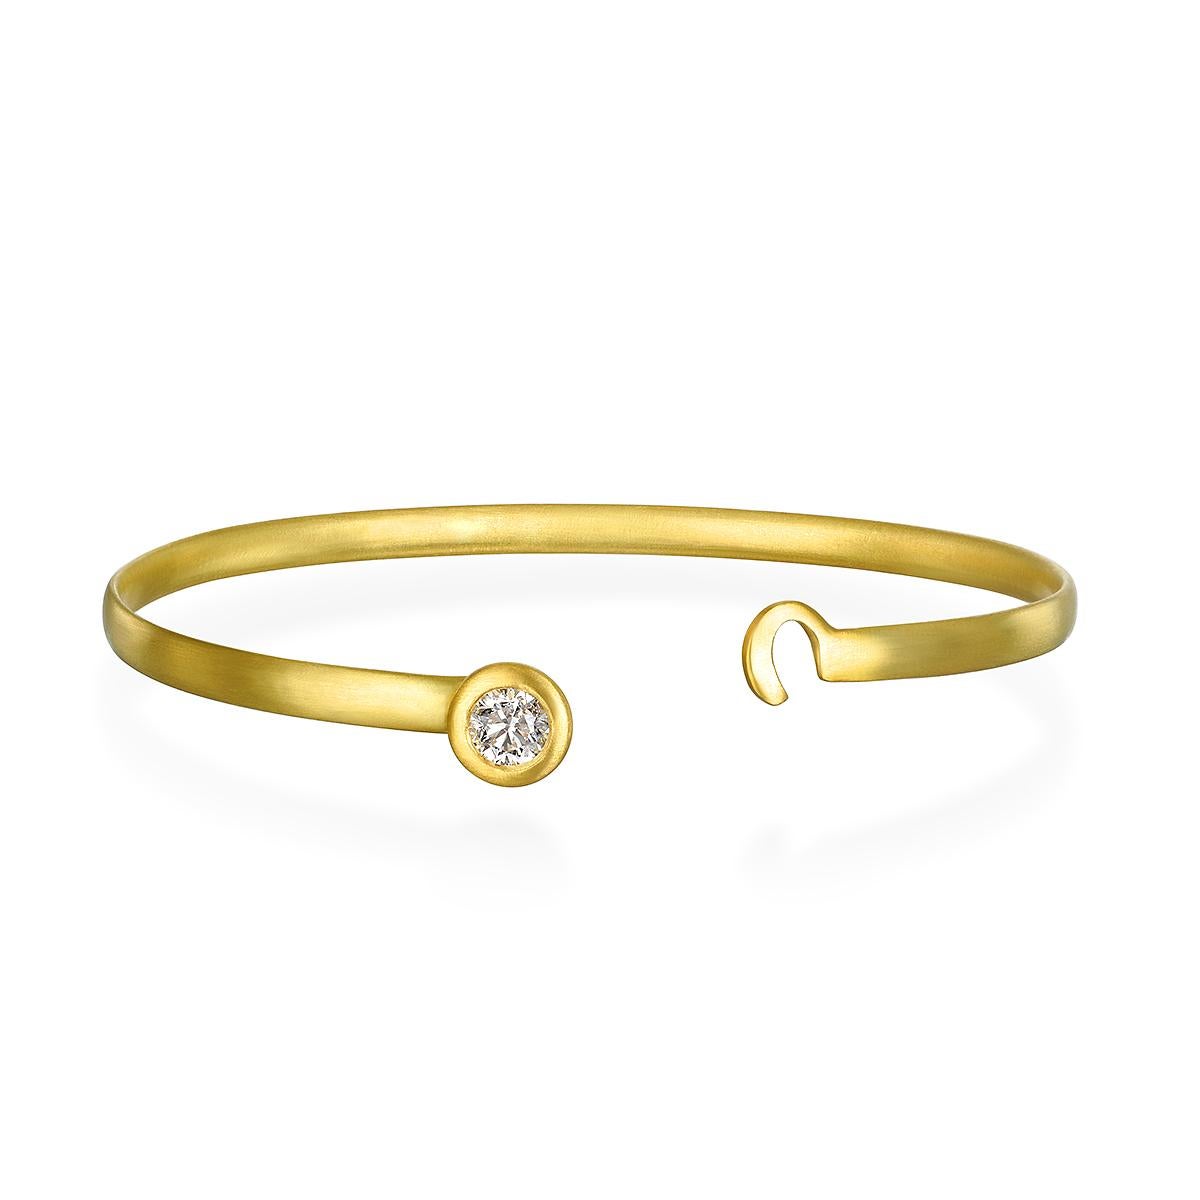 Simply beautiful, this Faye Kim 18 Karat Gold Diamond Solitaire Button Bangle is handmade and oval in shape for a more snug fit. The bright white round brilliant-cut diamond sparkles against the bangle's matte finish. Perfect for wearing alone or